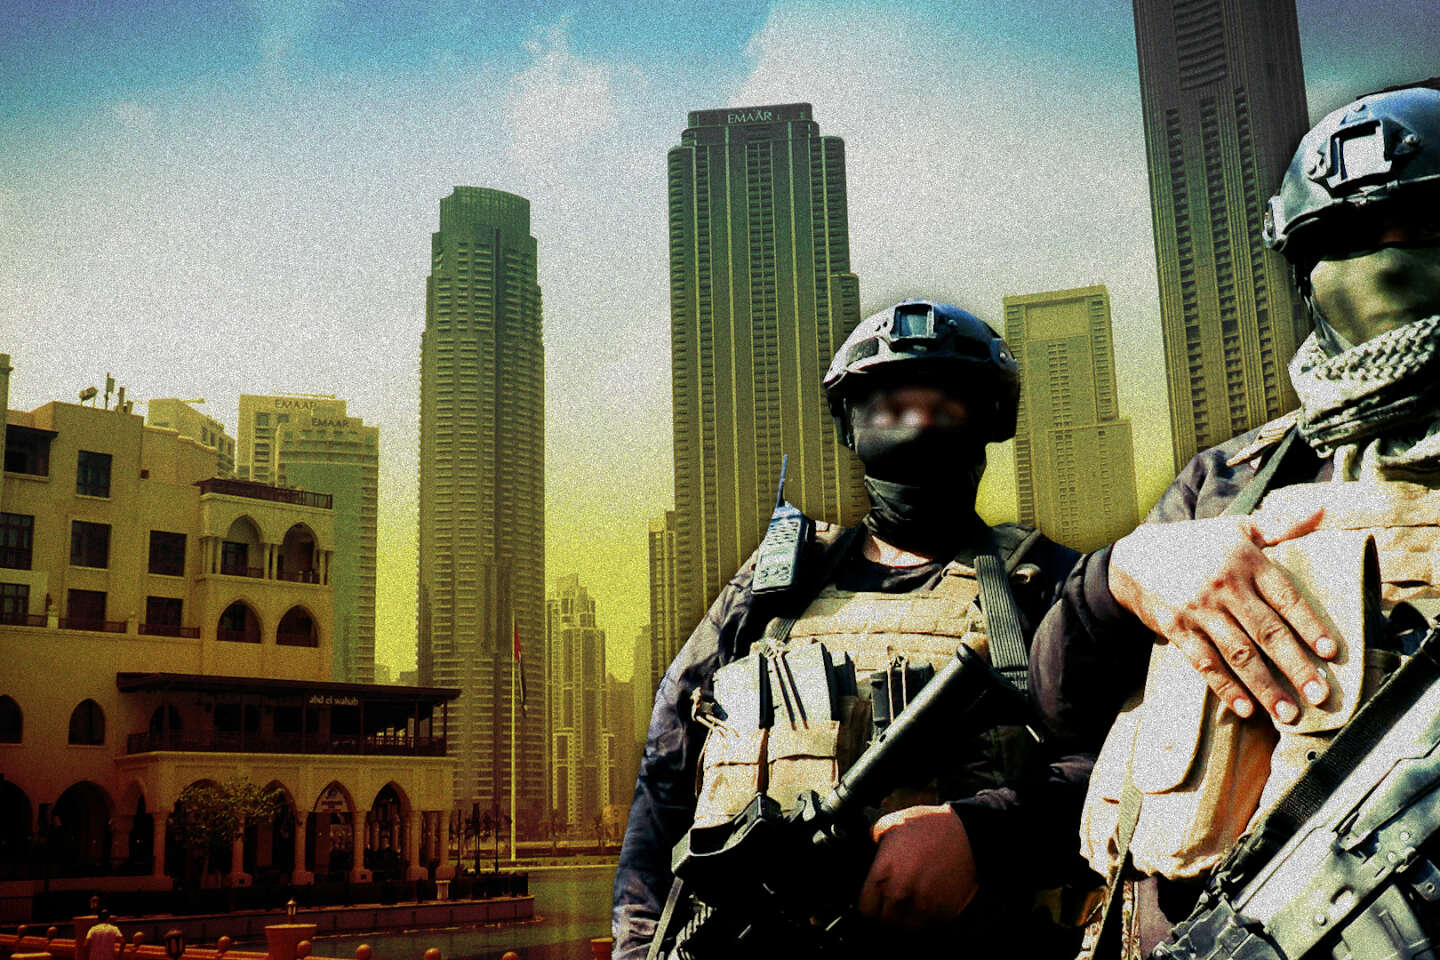 How to launder $50 million in Dubai: Watch the third episode of Narco Business